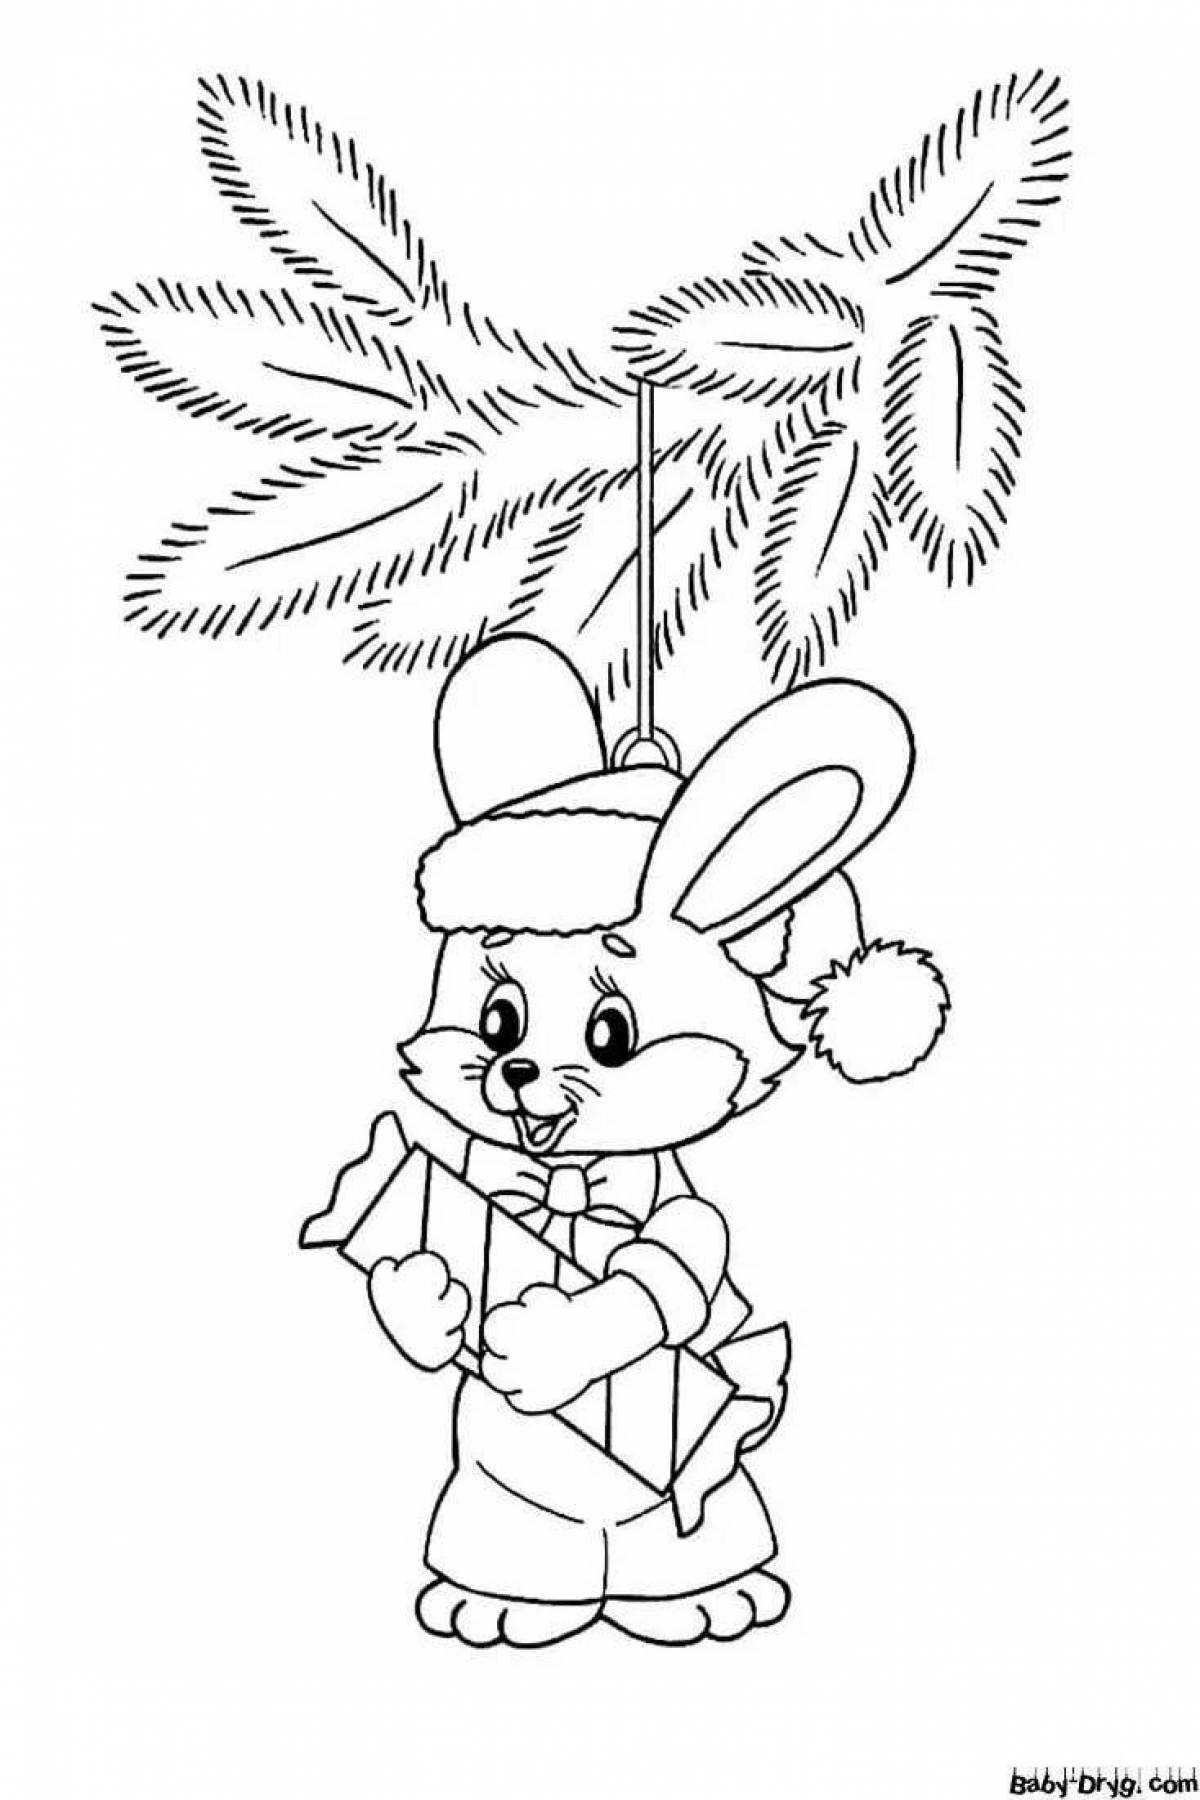 Adorable hare and tree coloring